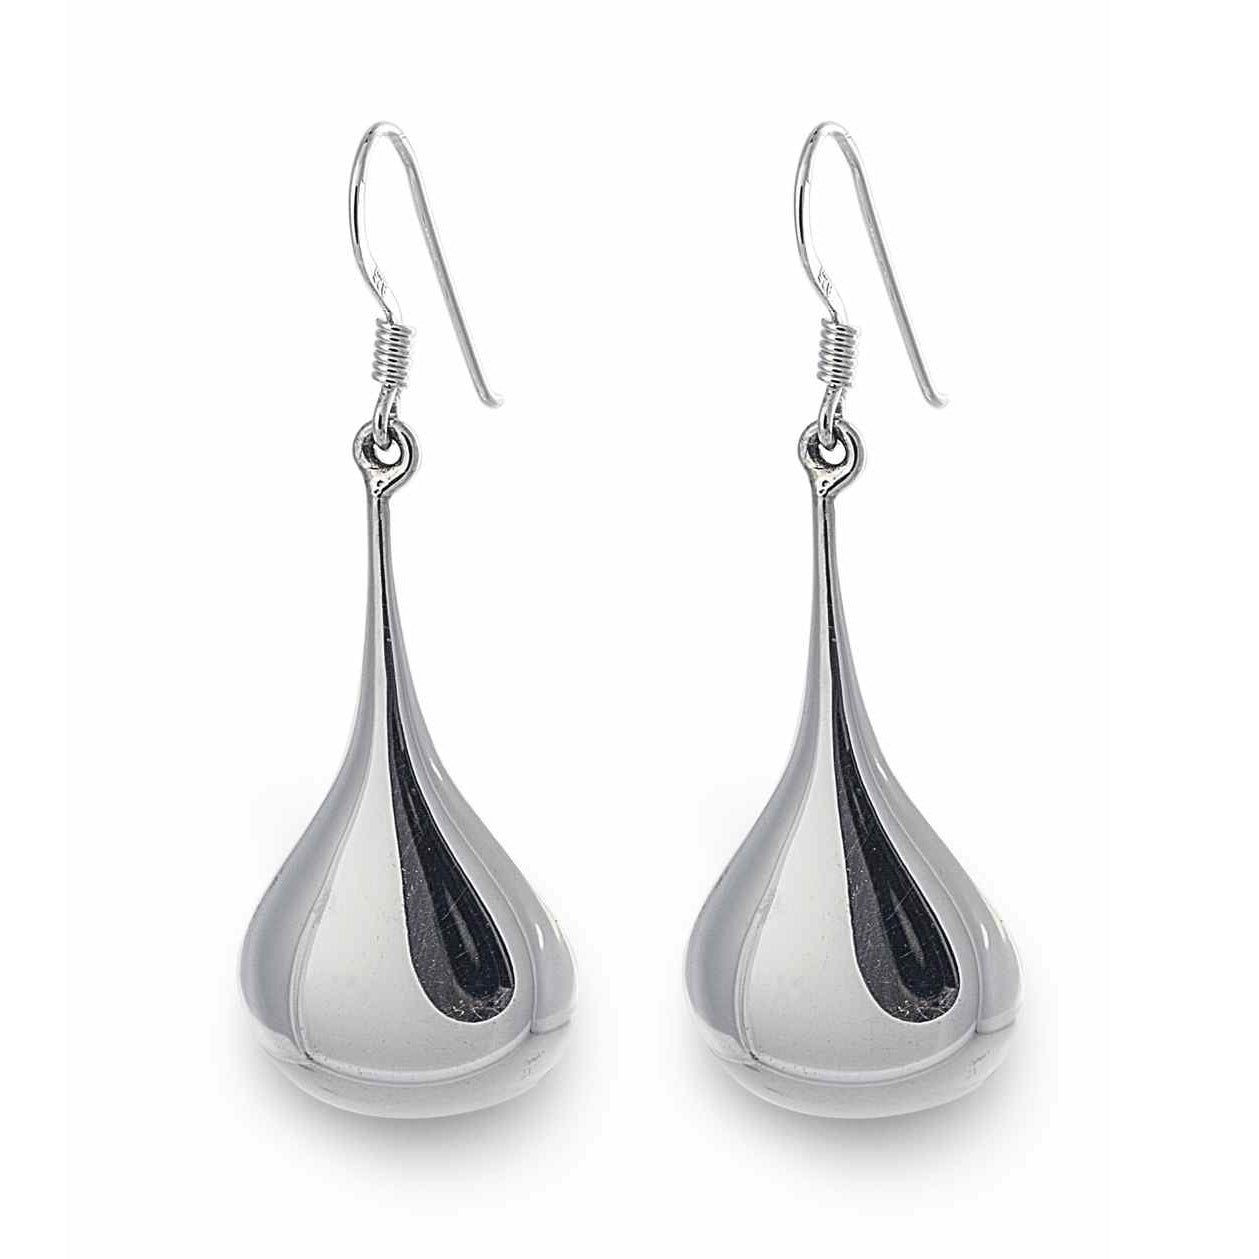 The Dainty Jeannie Earrings are modern French style earrings in 925 sterling silver with a small tear-shaped drop on an ear wire. Jewellery by Bellagio & Co. Worldwide shipping.